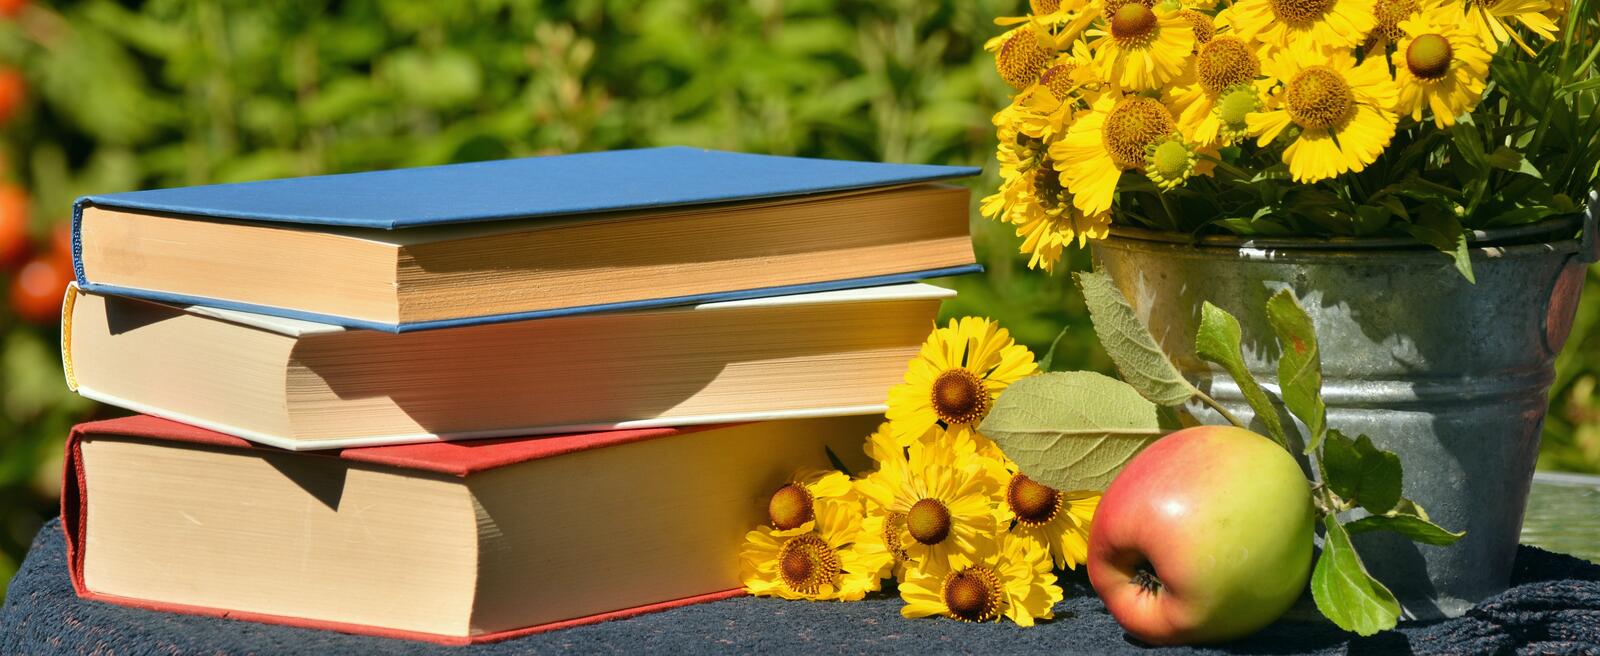 Free photo Yellow flowers in a bucket on a table of books